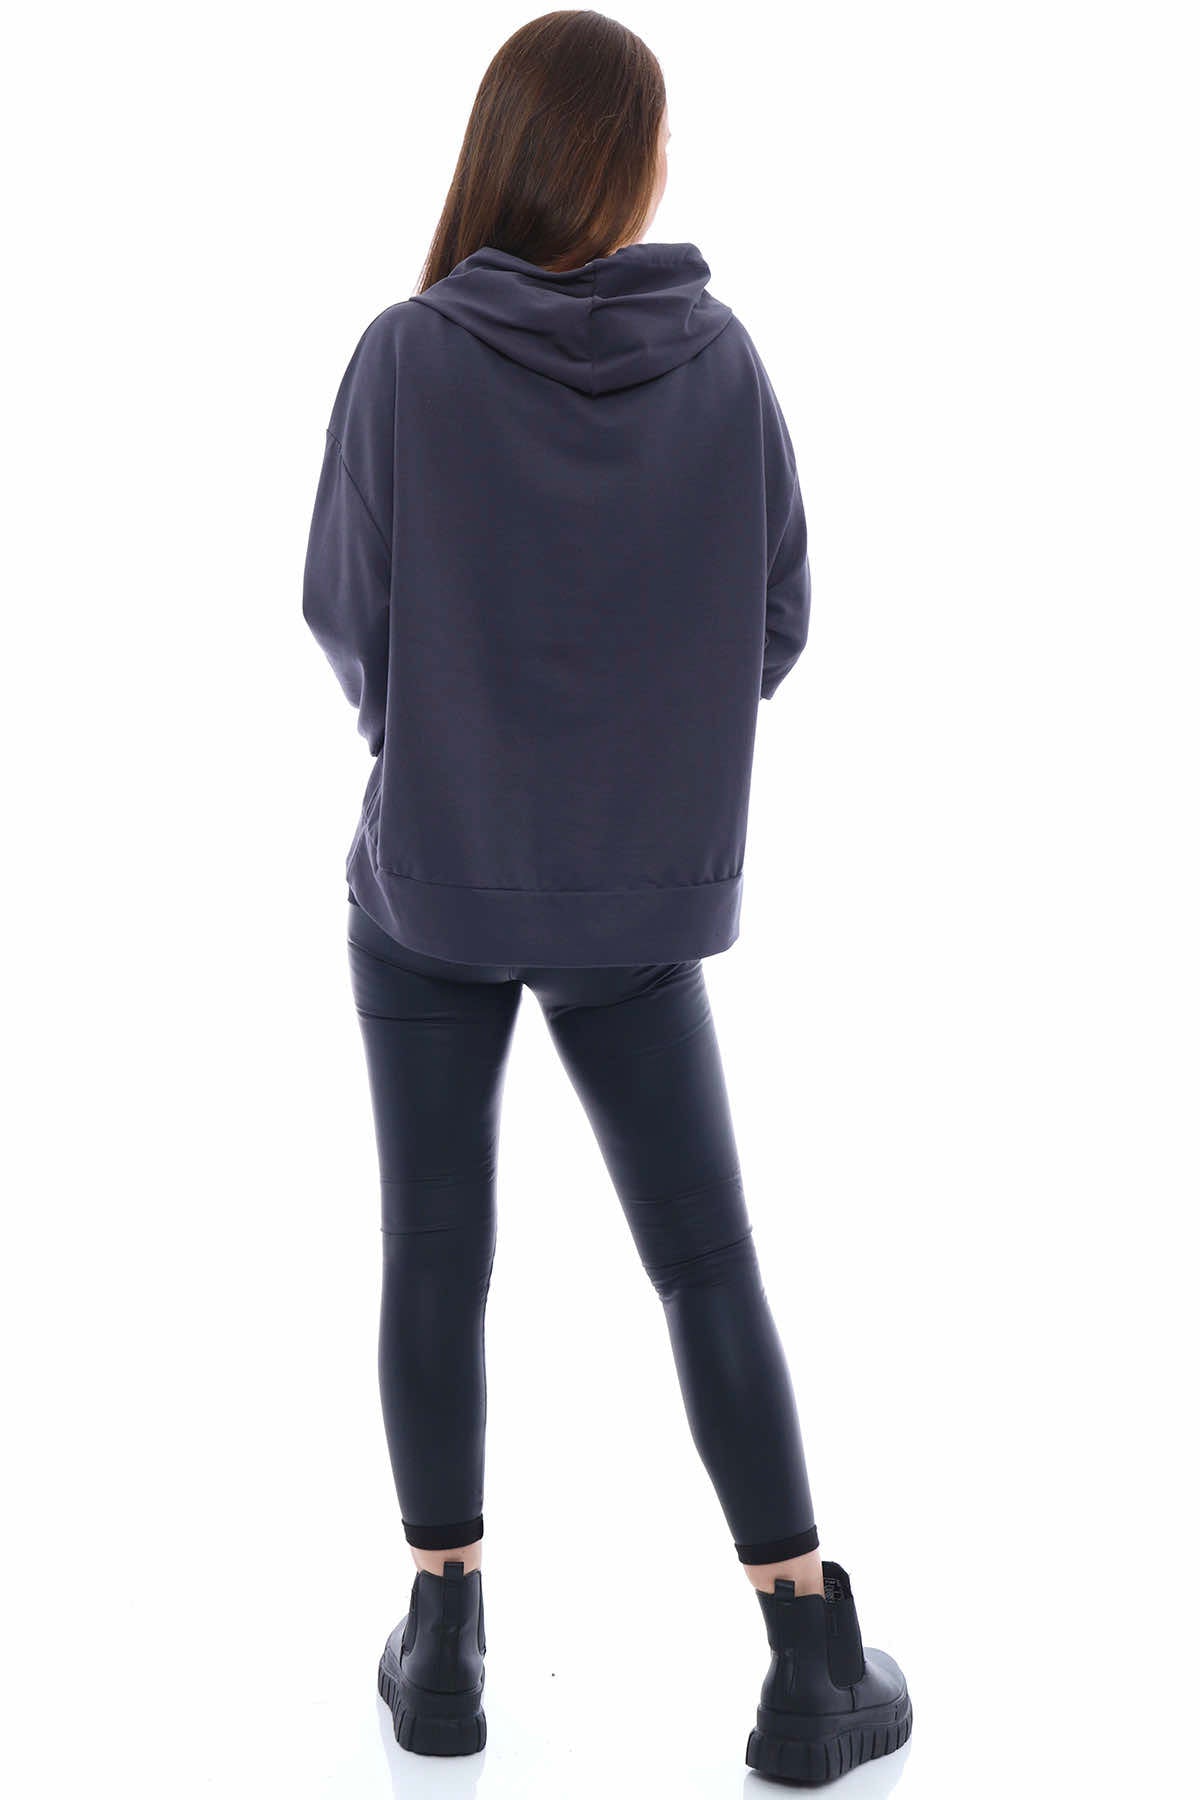 Martha Love Cotton Hooded Top Charcoal